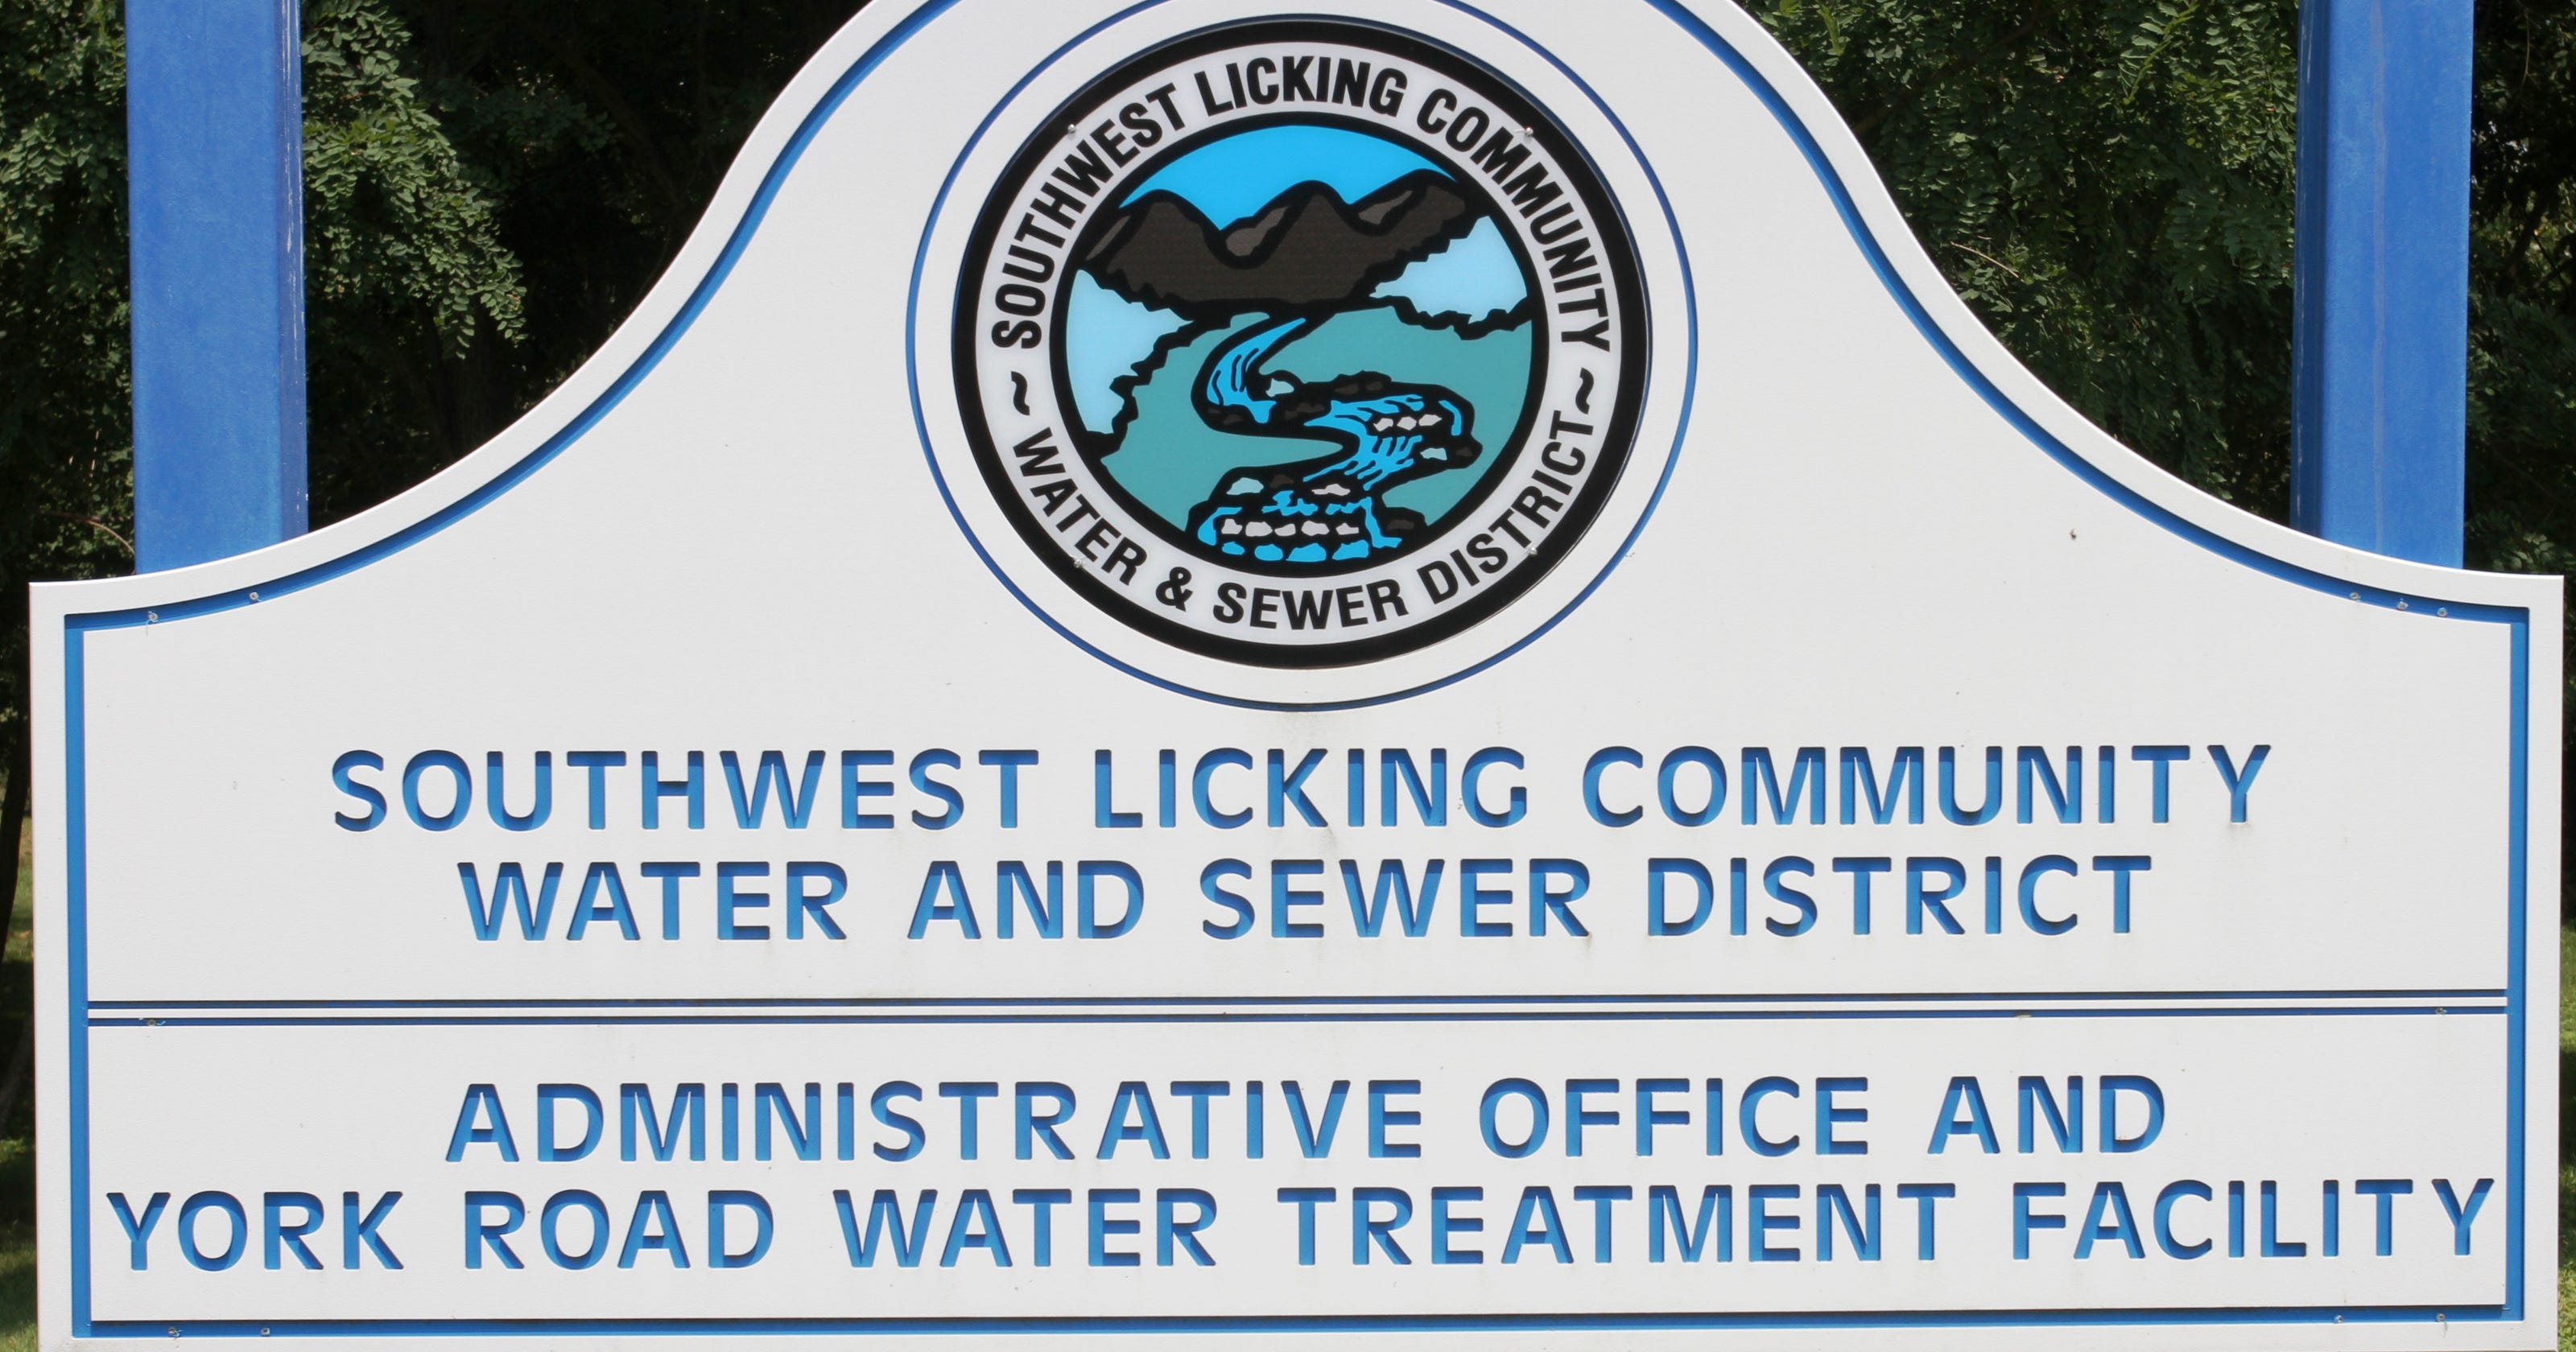 water-district-utility-contract-investigation-to-wrap-up-in-30-60-days